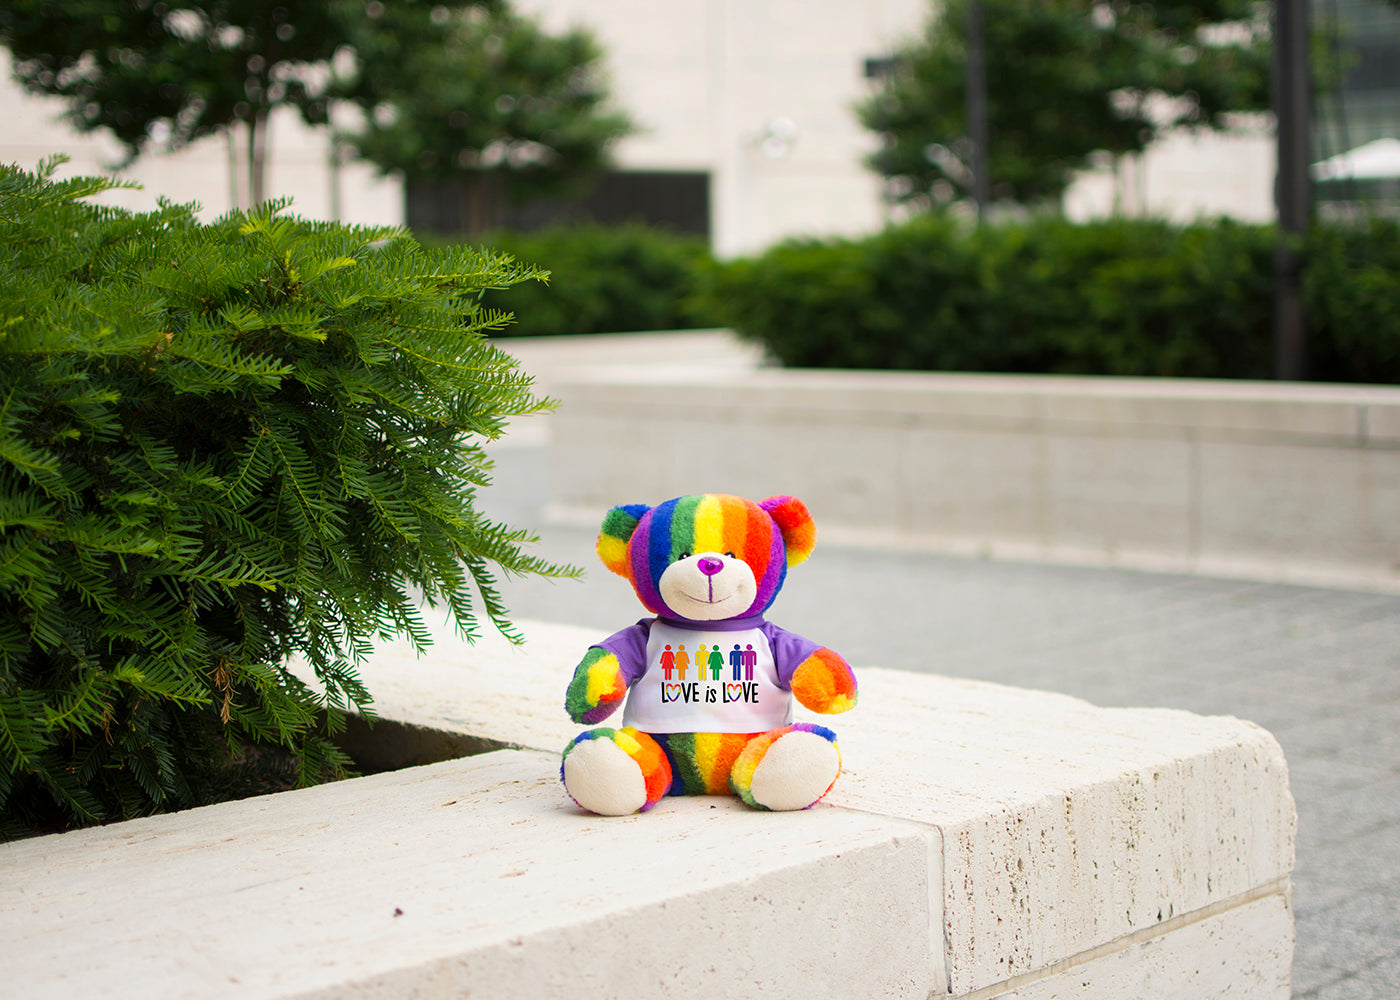 Bear Buggy®'s Totally Pride Teddy bear photographed in Damrosch Park at the Lincoln Center in Midtown Manhattan, NY. Photographed to celebrate Pride.